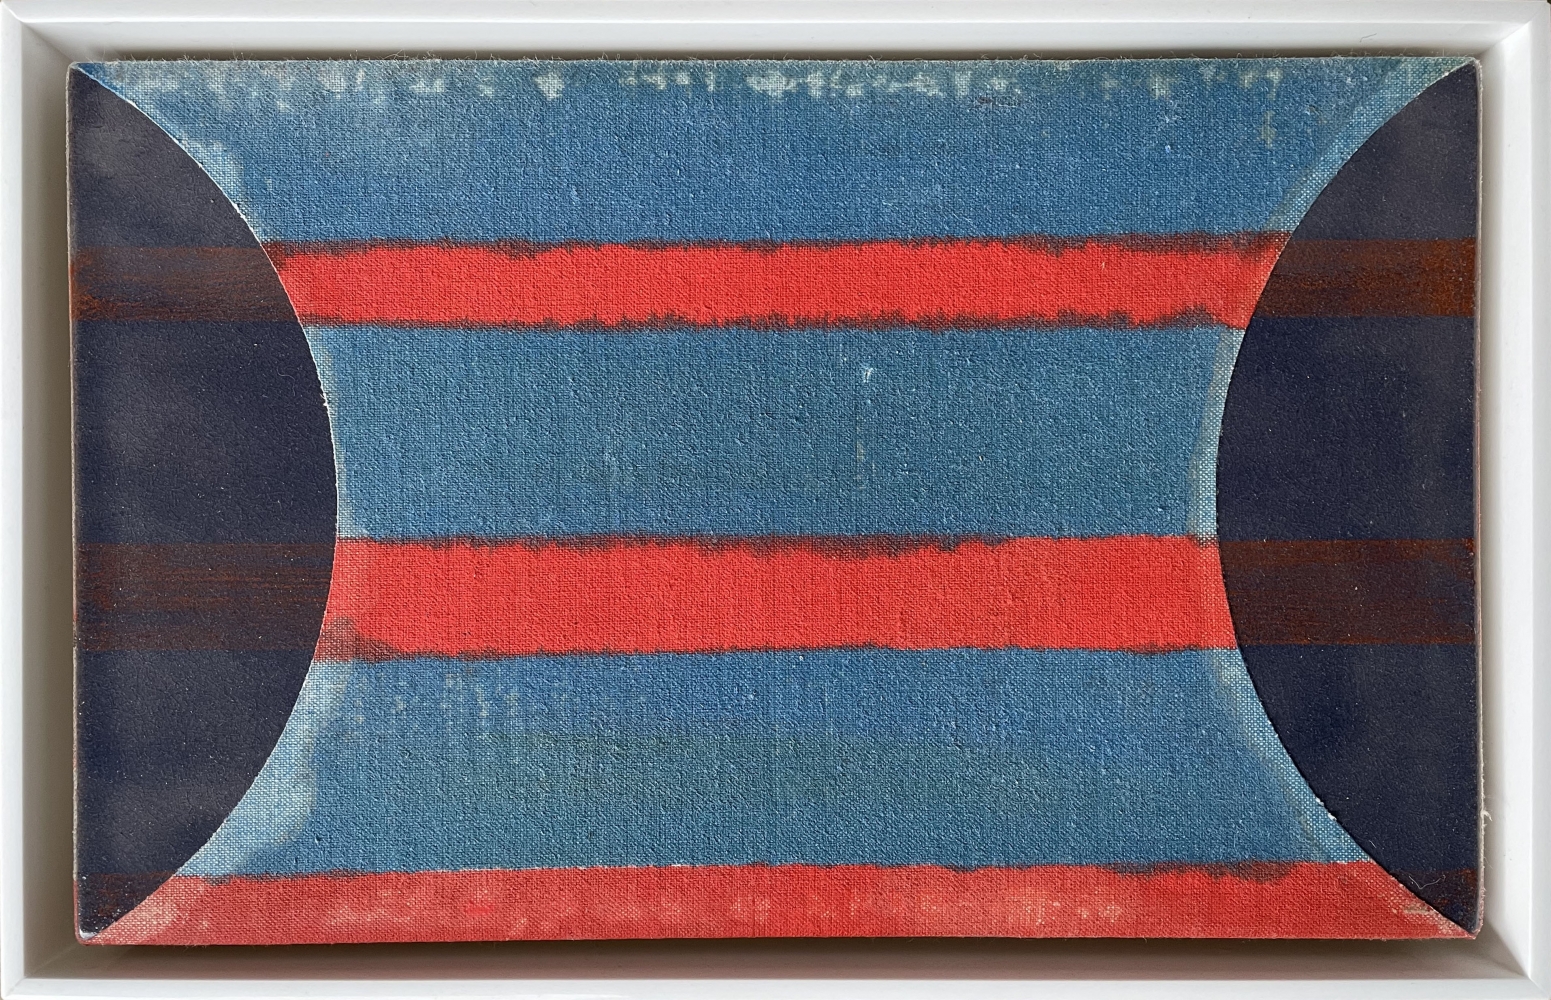 Frank.Olt.Untitled.Encaustic.on.Canvas.with.Ceramic.blue.and.red.stripe